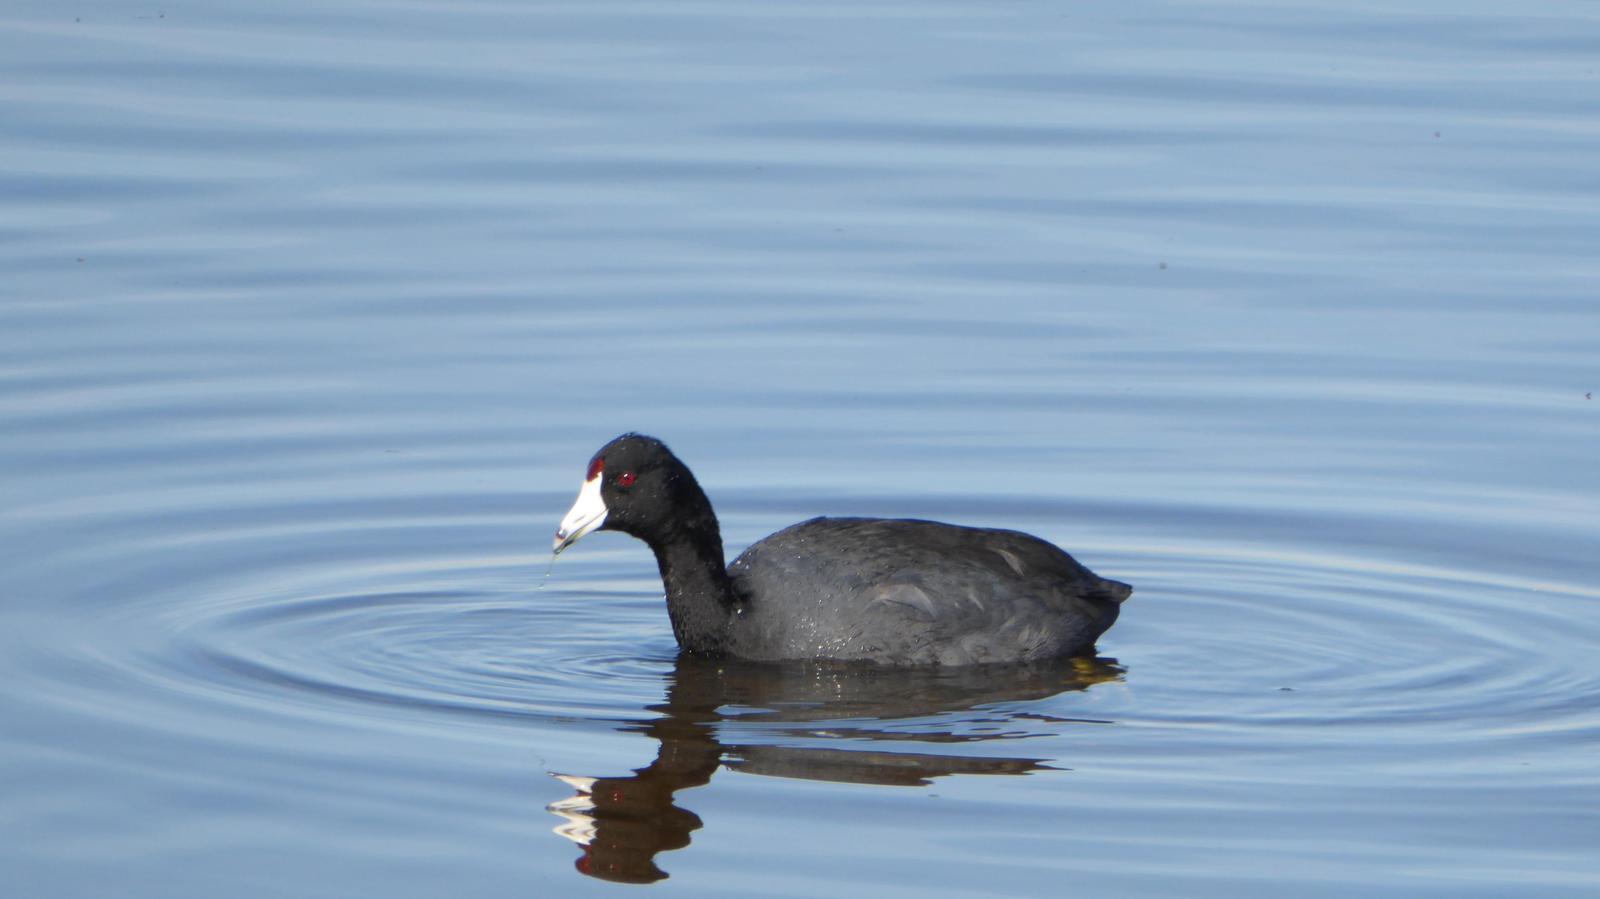 American Coot Photo by Daliel Leite